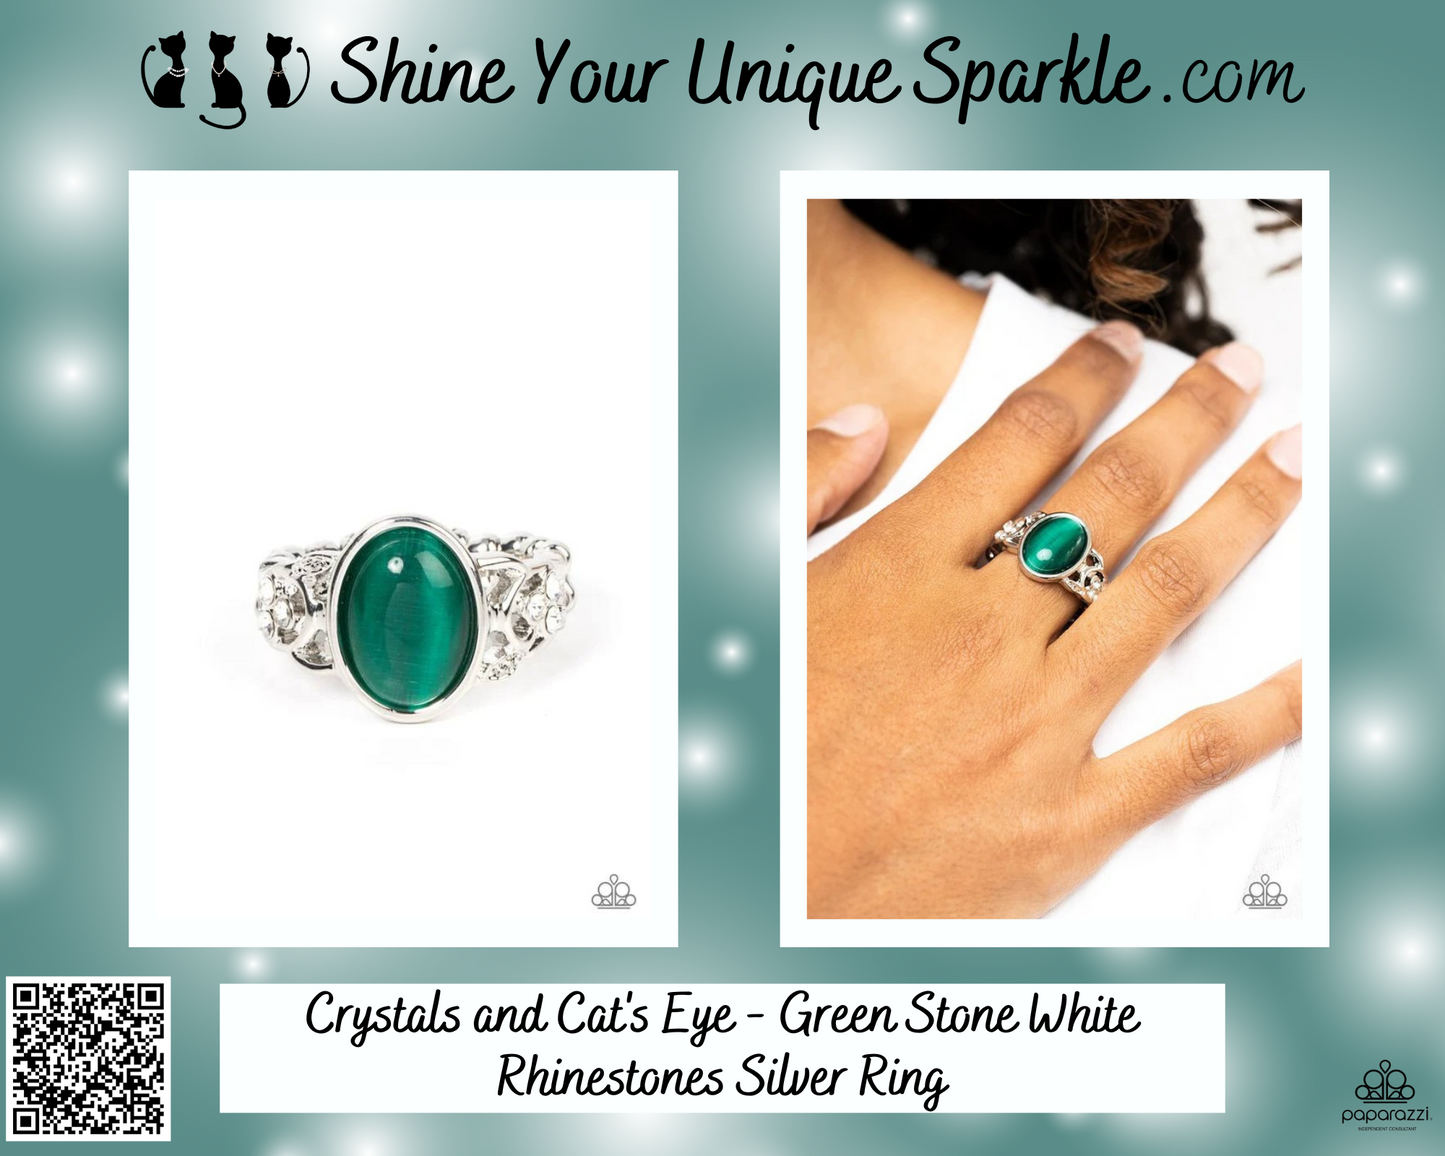 Crystals and Cat's Eye - Green Stone White Rhinestones Silver Ring